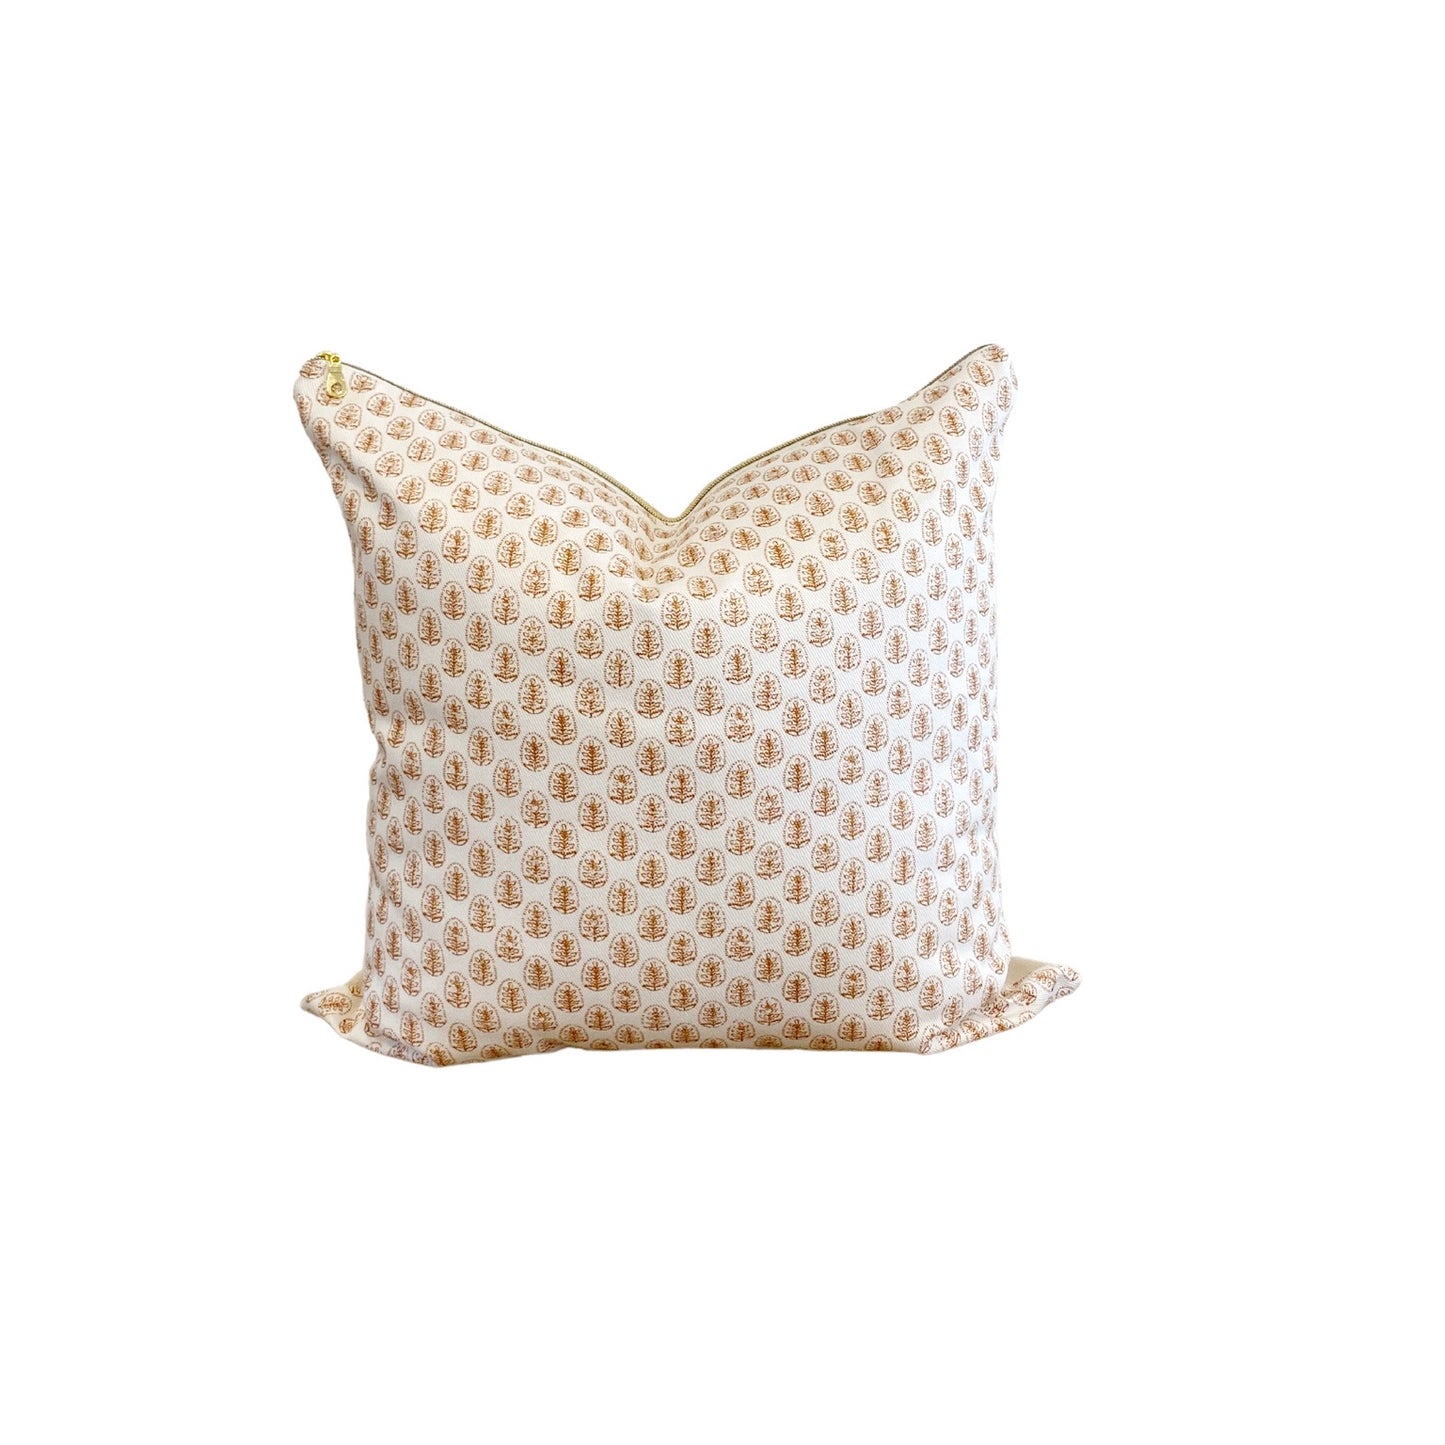 Imma Gold and Cream Pillow Cover - Designed by Holli Zollinger